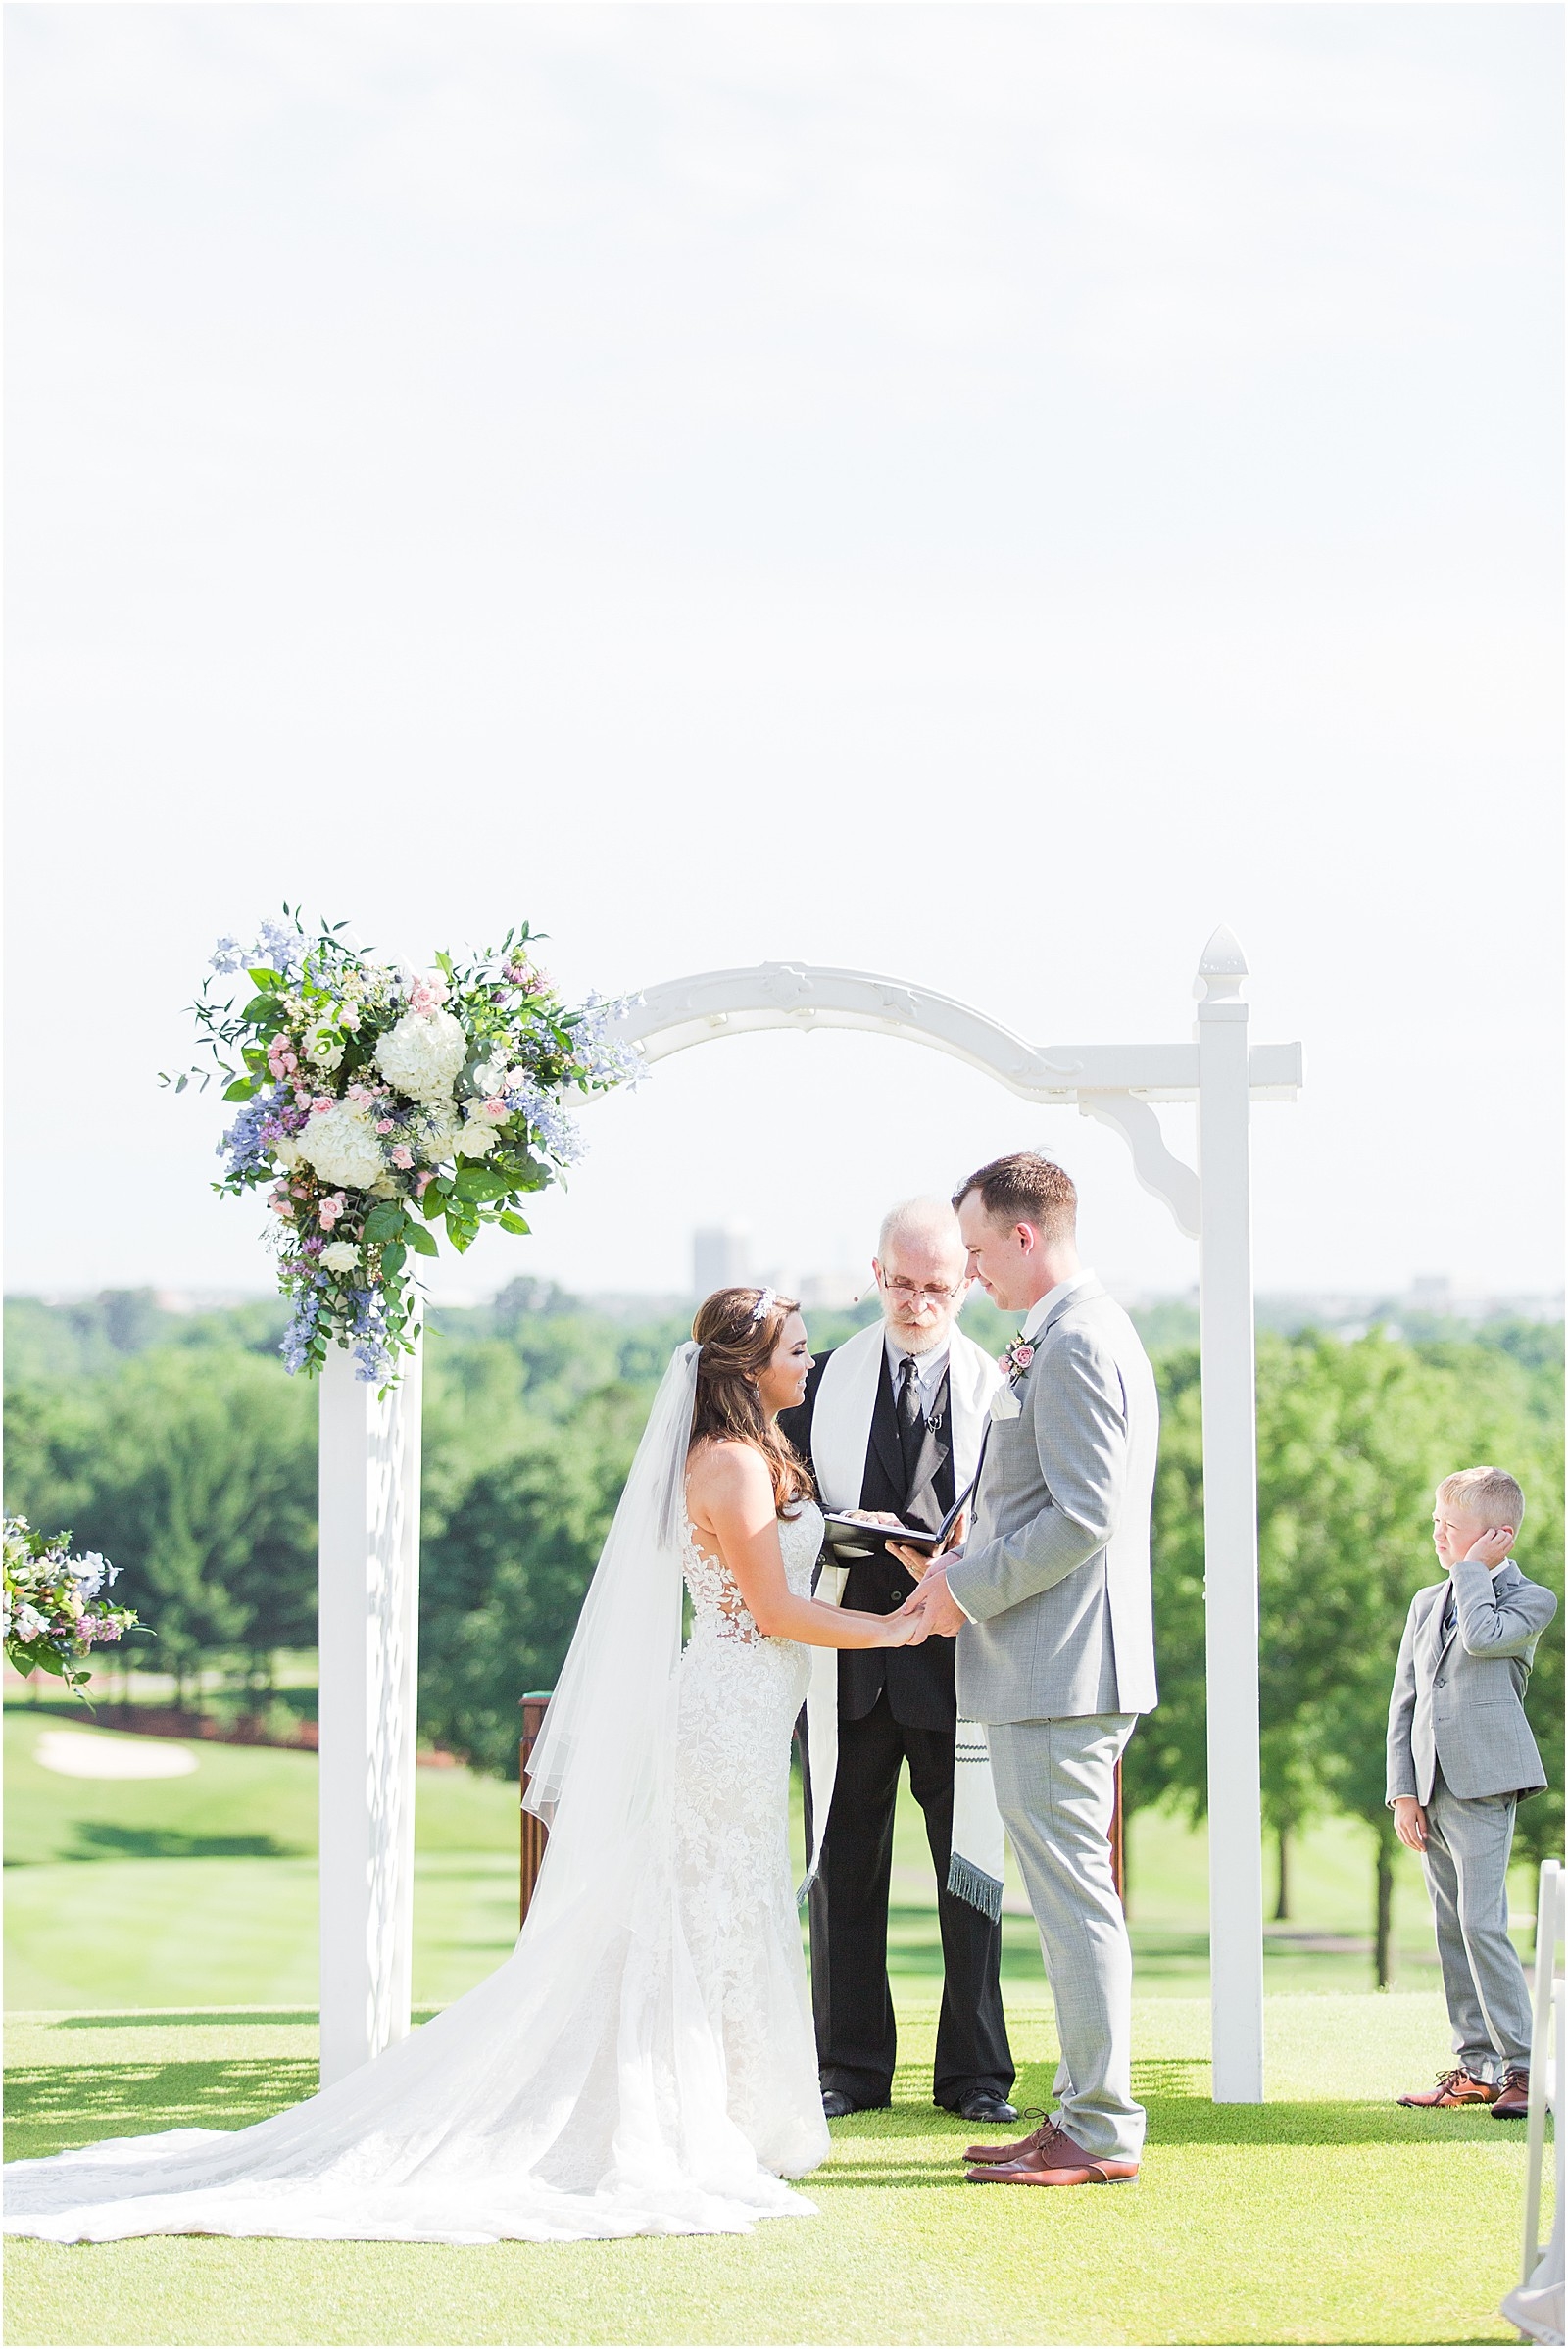 An Evansville County Club Wedding | Abby and Stratton 100.jpg